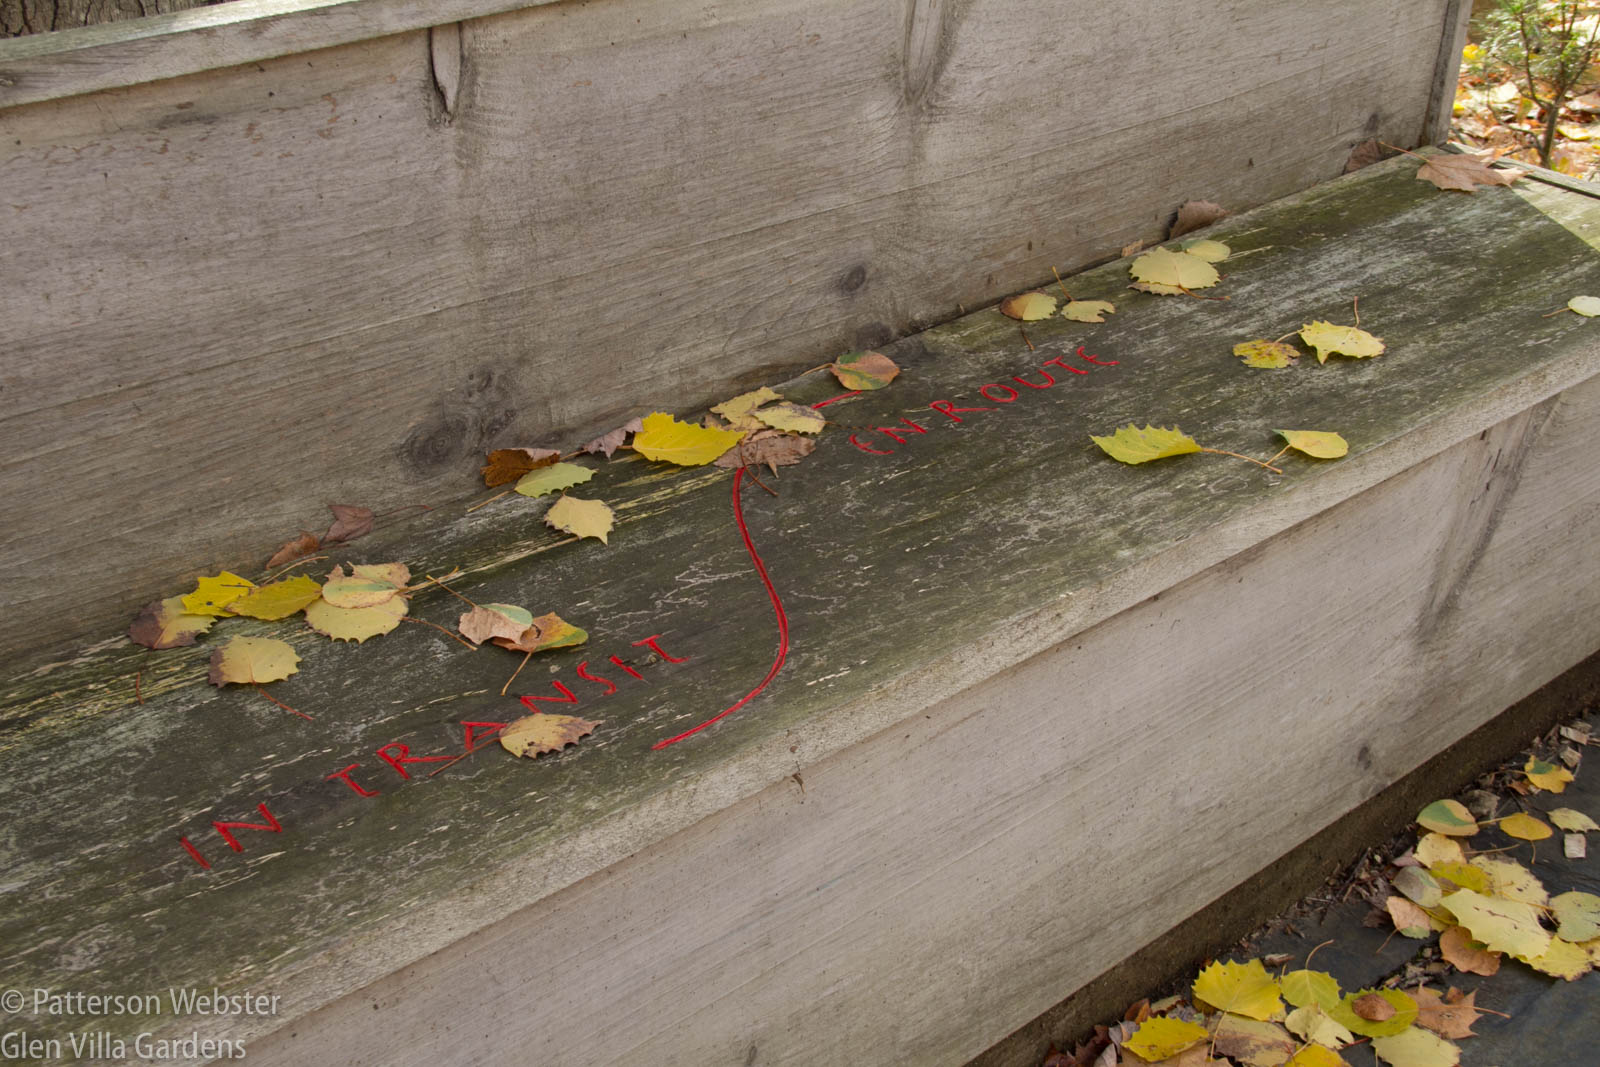 Autumn leaves make the message more poignant.